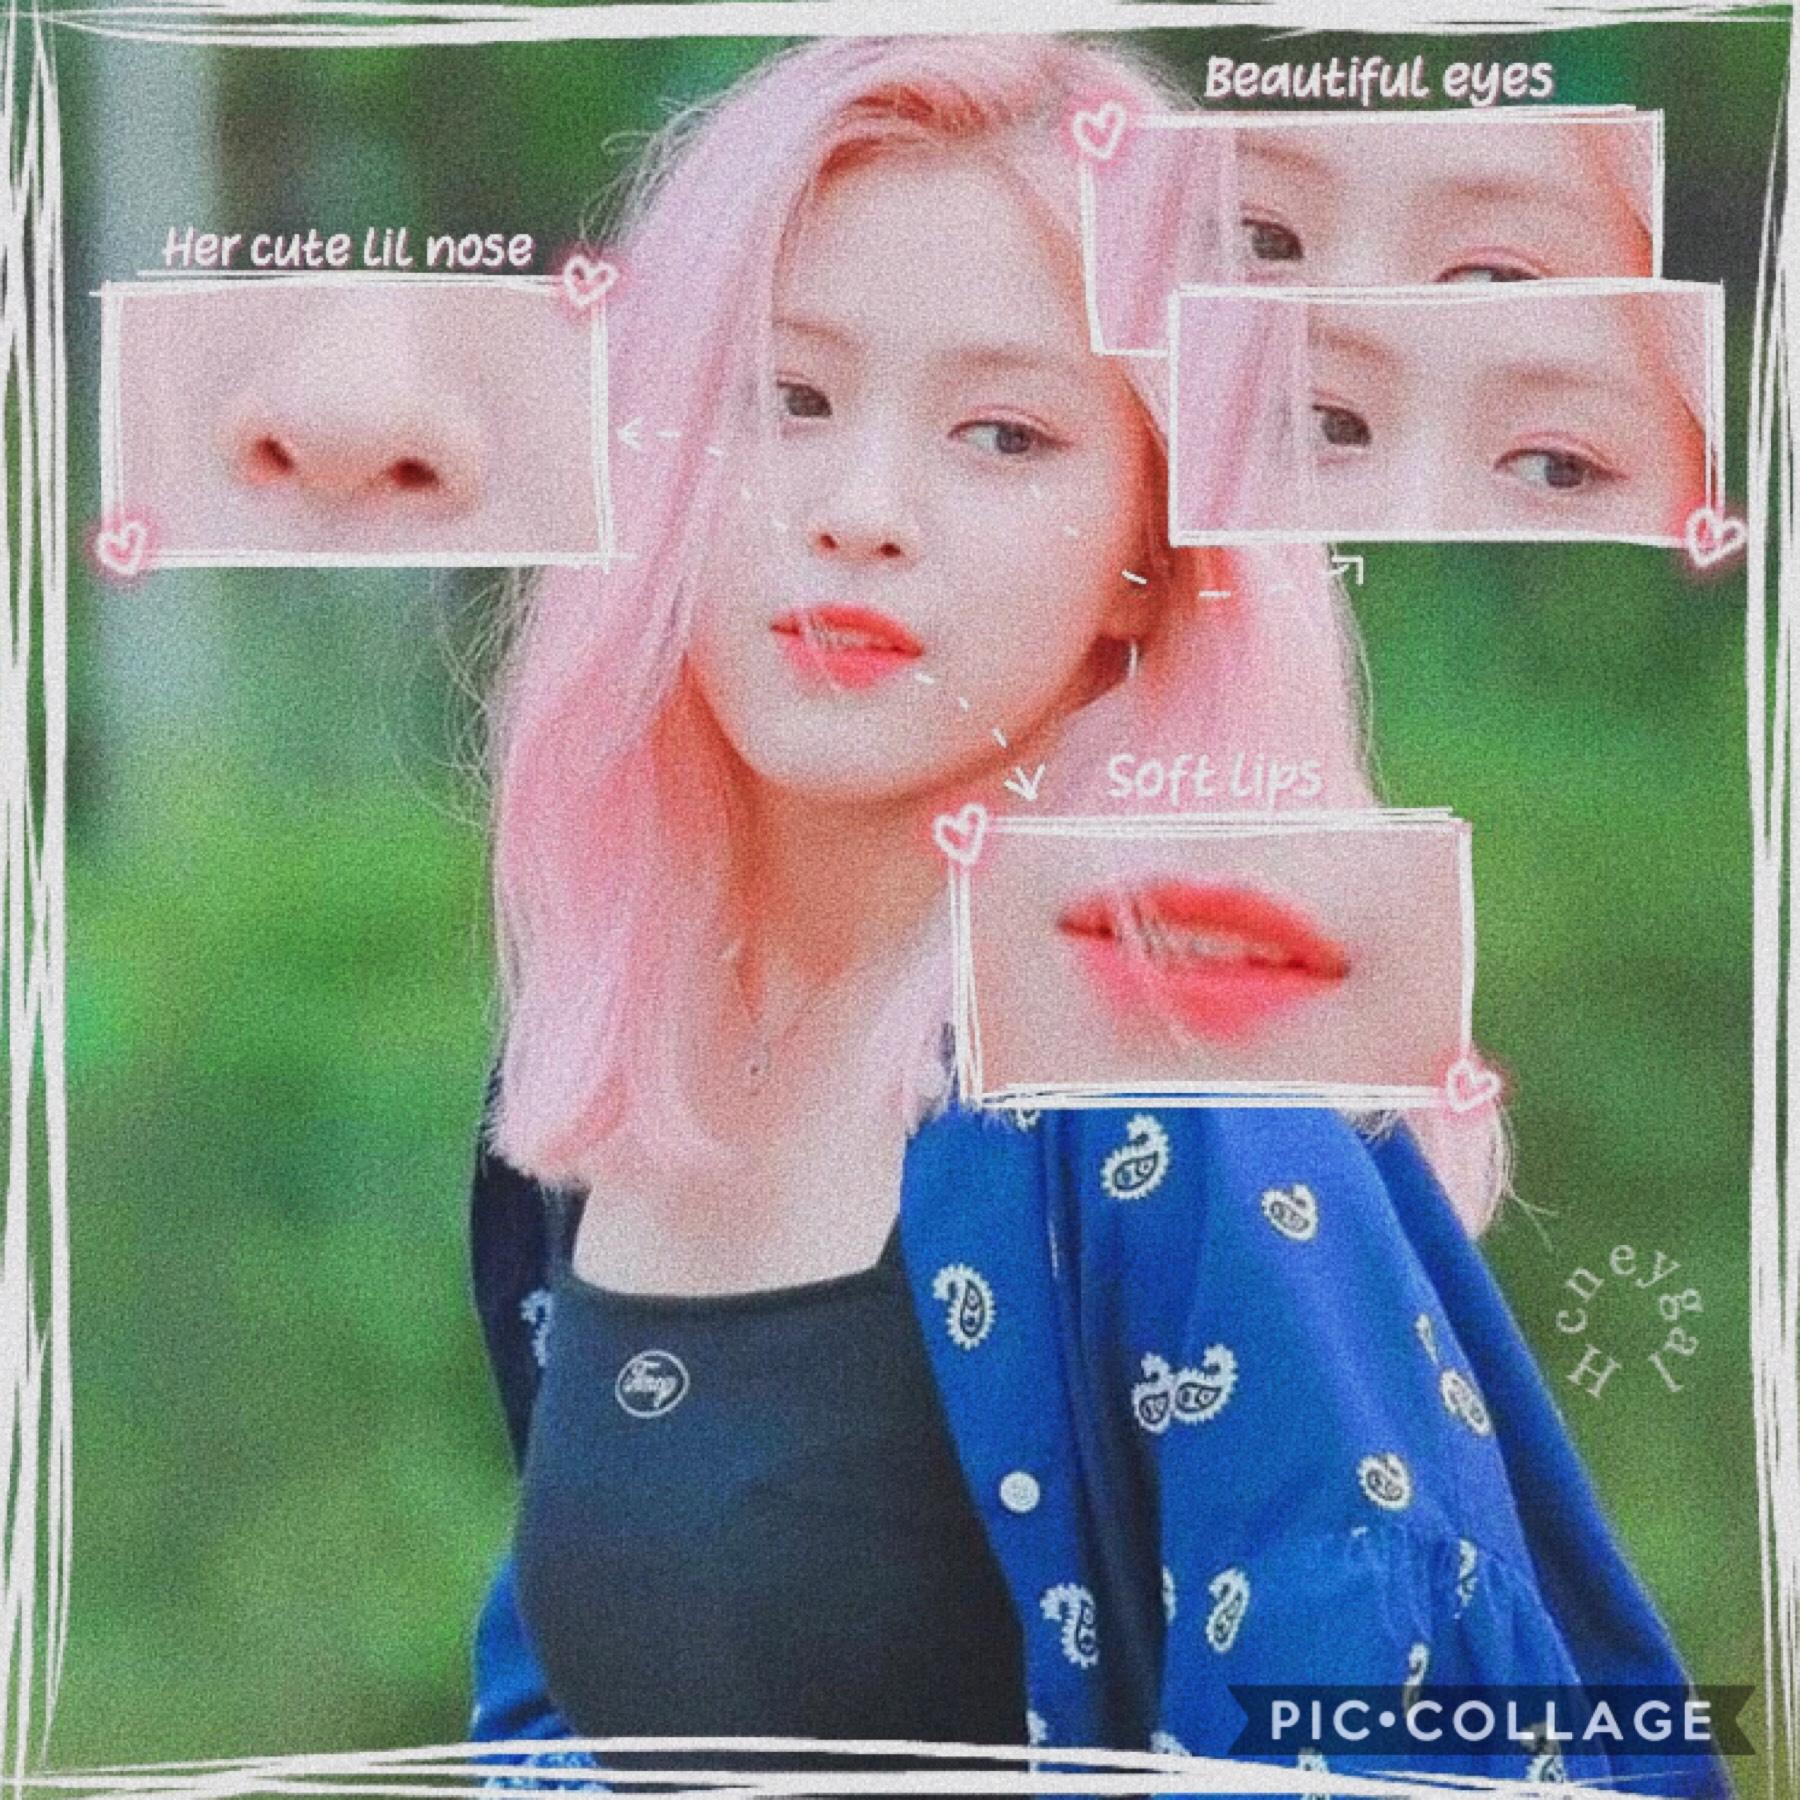 ʚ 𝚝𝚊𝚙 𝚑𝚎𝚛𝚎! ɞ
Hey you beautiful ppl :) thought I make something really cute lol it’s ryujin from itzy (which you all should stan if you haven’t already)
Ty for allll the love ◝(ᵔᵕᵔ)◜ 